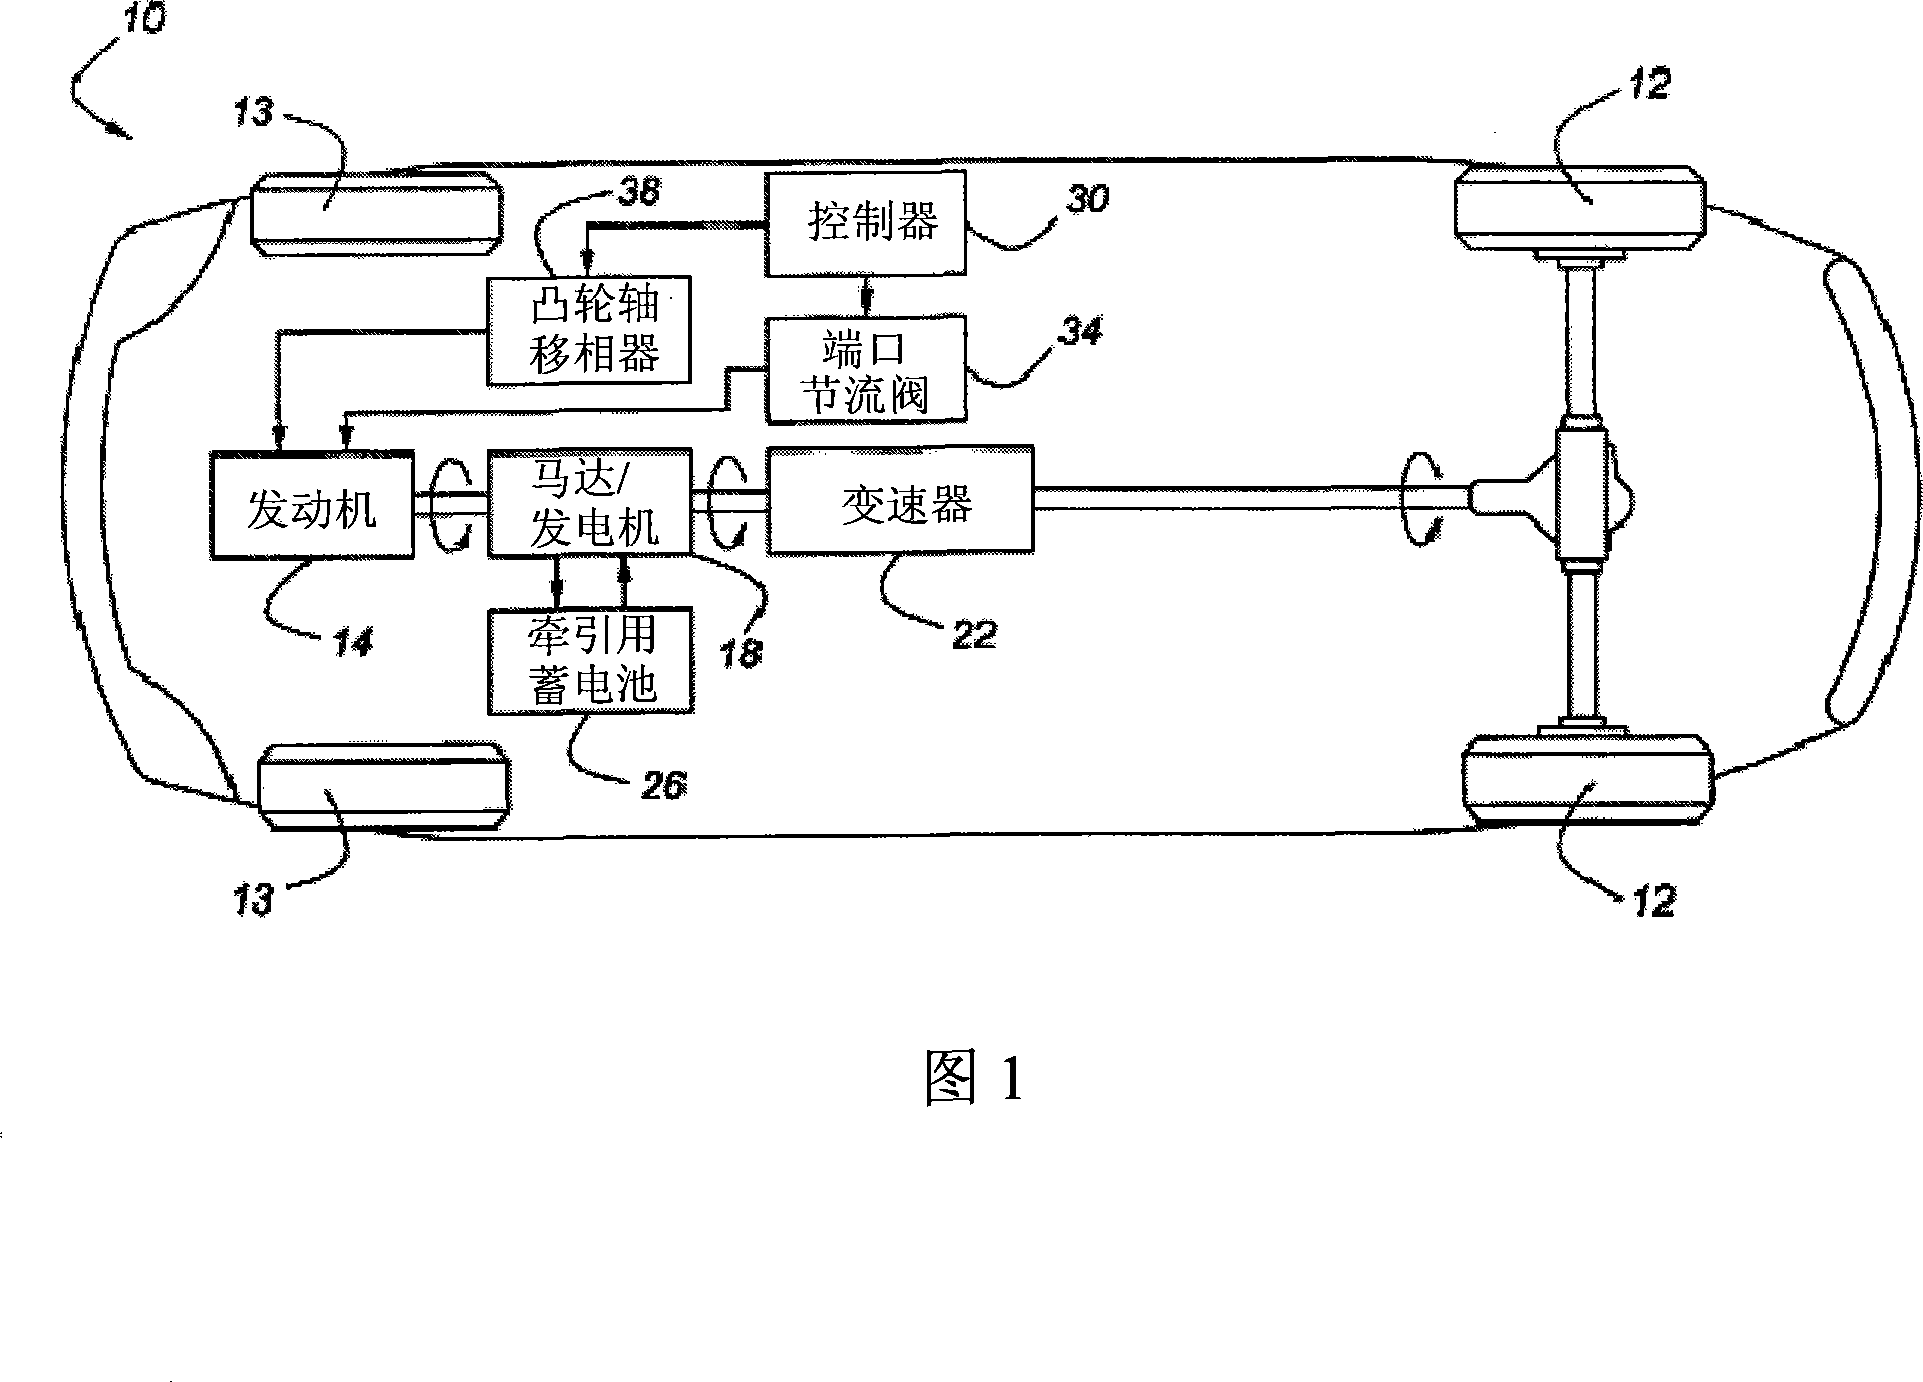 Hybrid vehicle with engine power cylinder deactivation